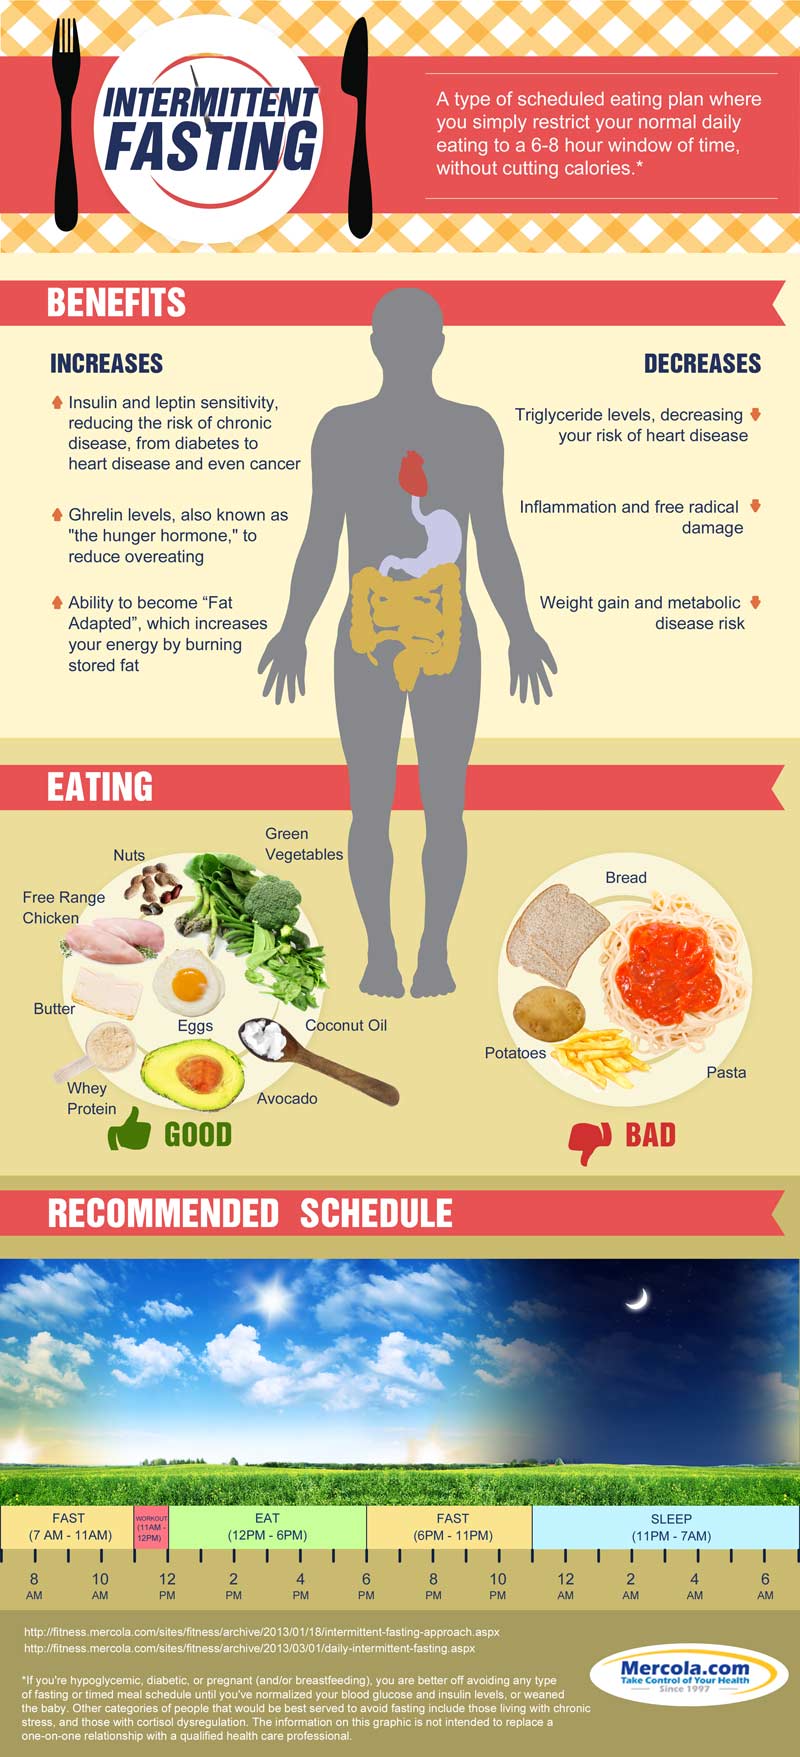 Intermittent Fasting for Health - Dr. Betsy Rice, ND